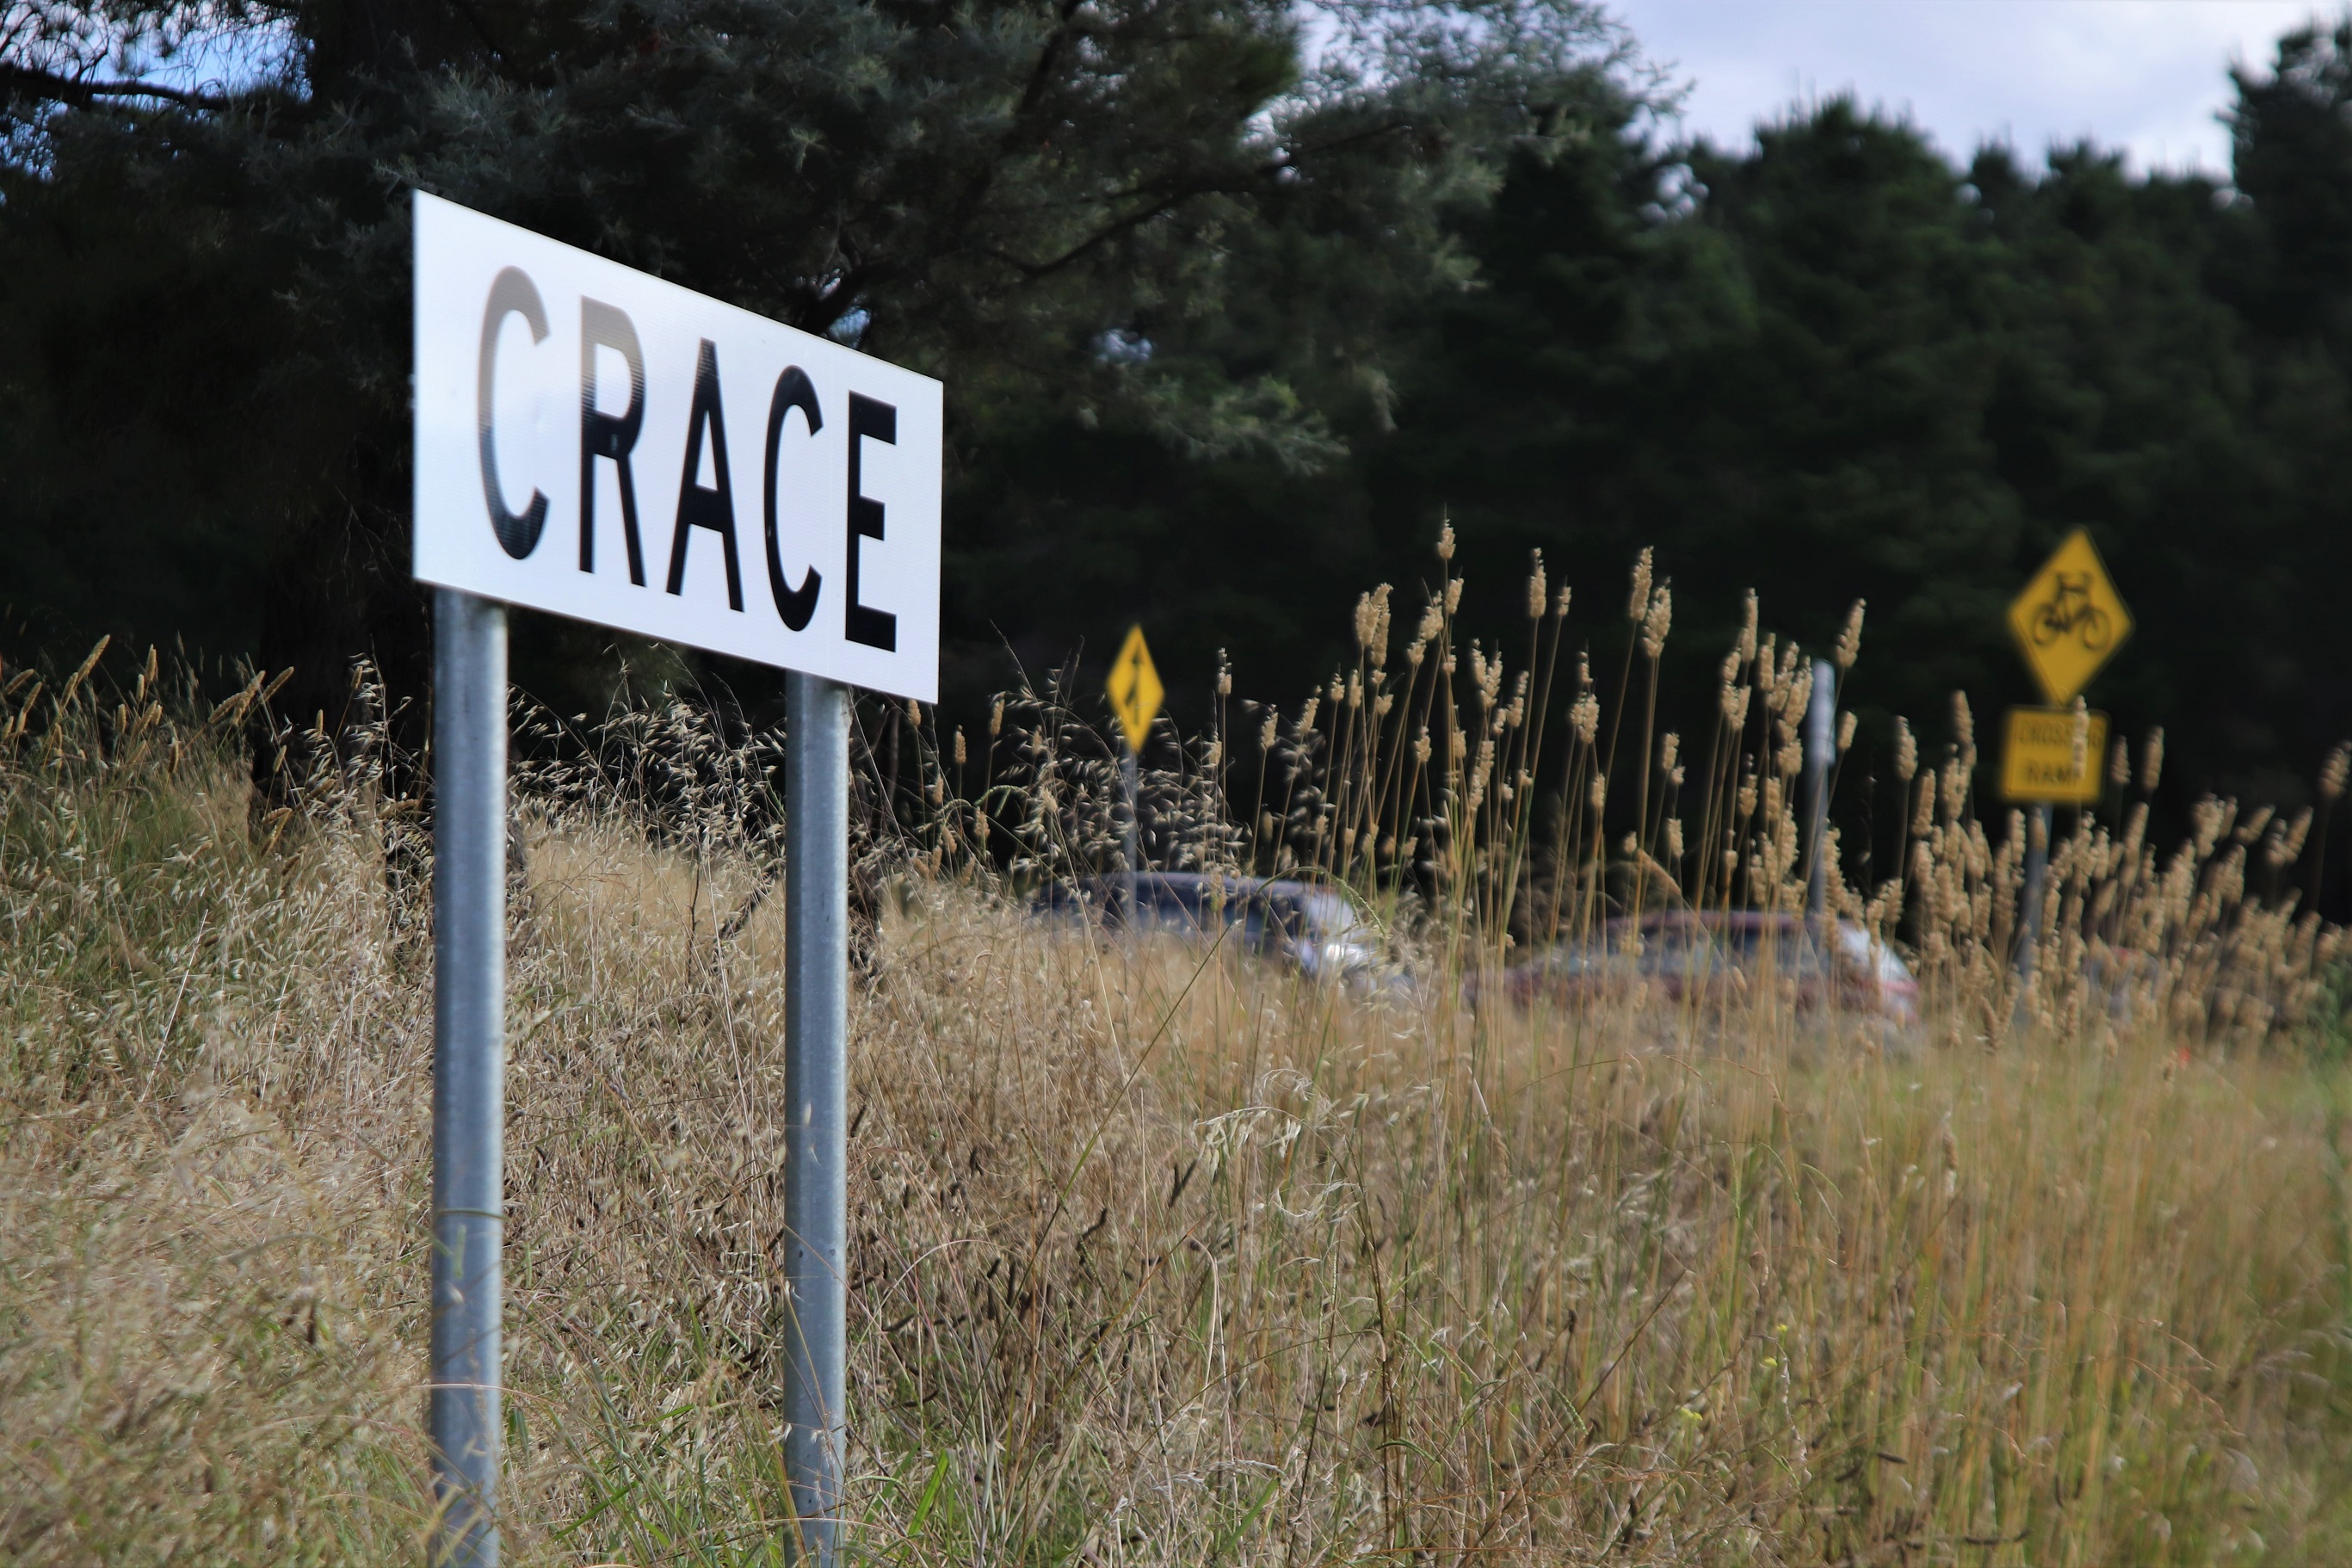 Mowing in parts of Crace 'abandoned' for years, posing risks locals say